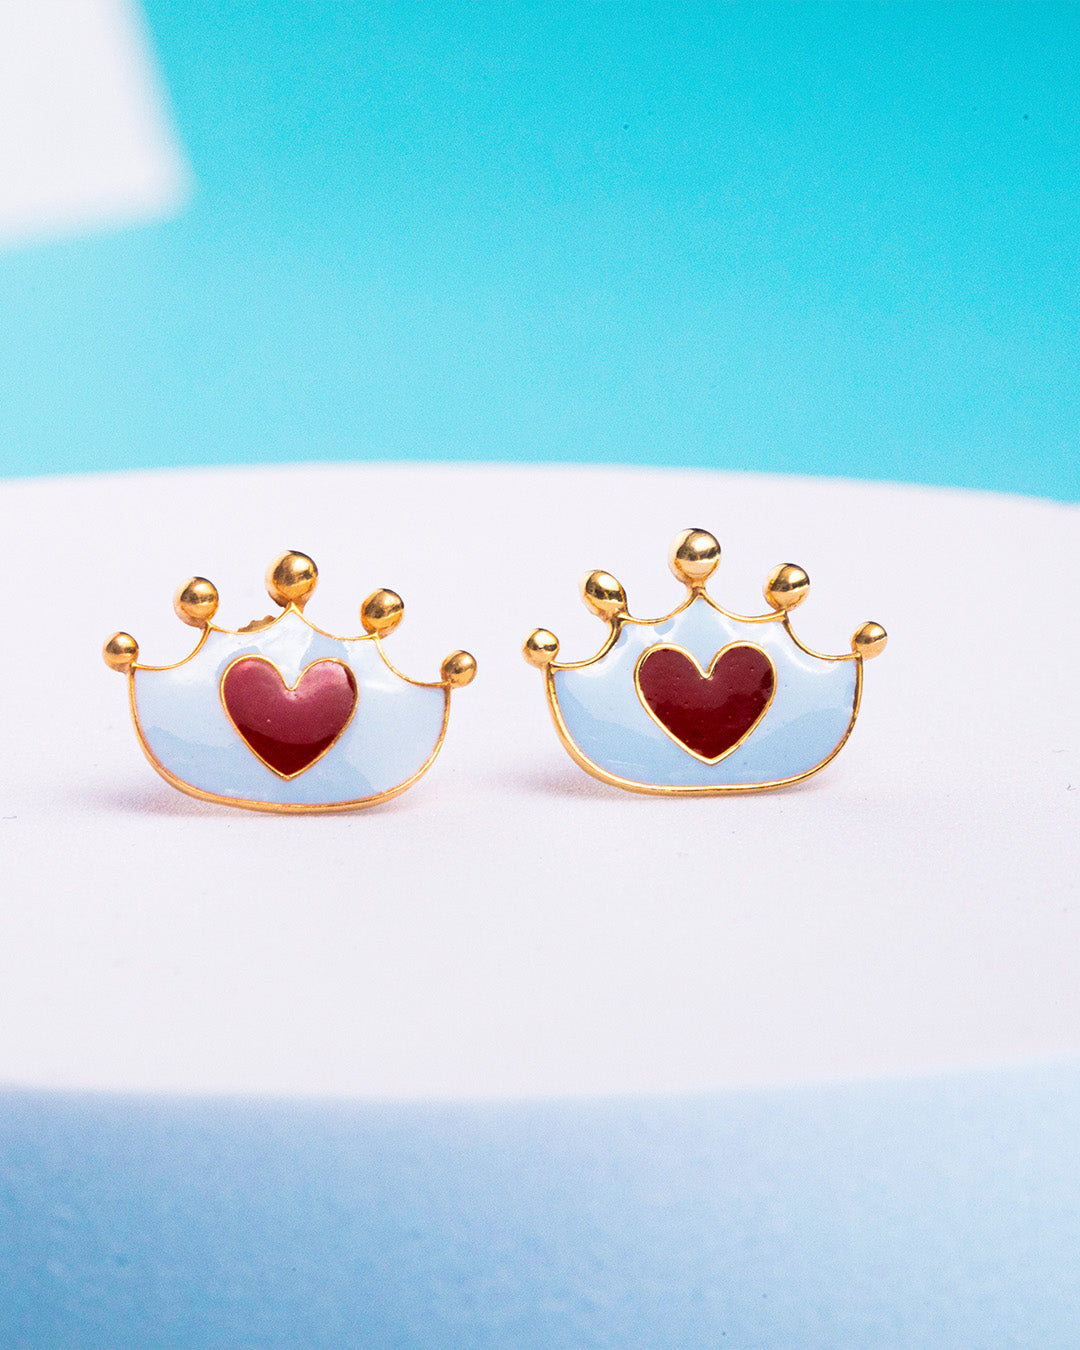 Mini Majesty Crowned with Heart Earrings